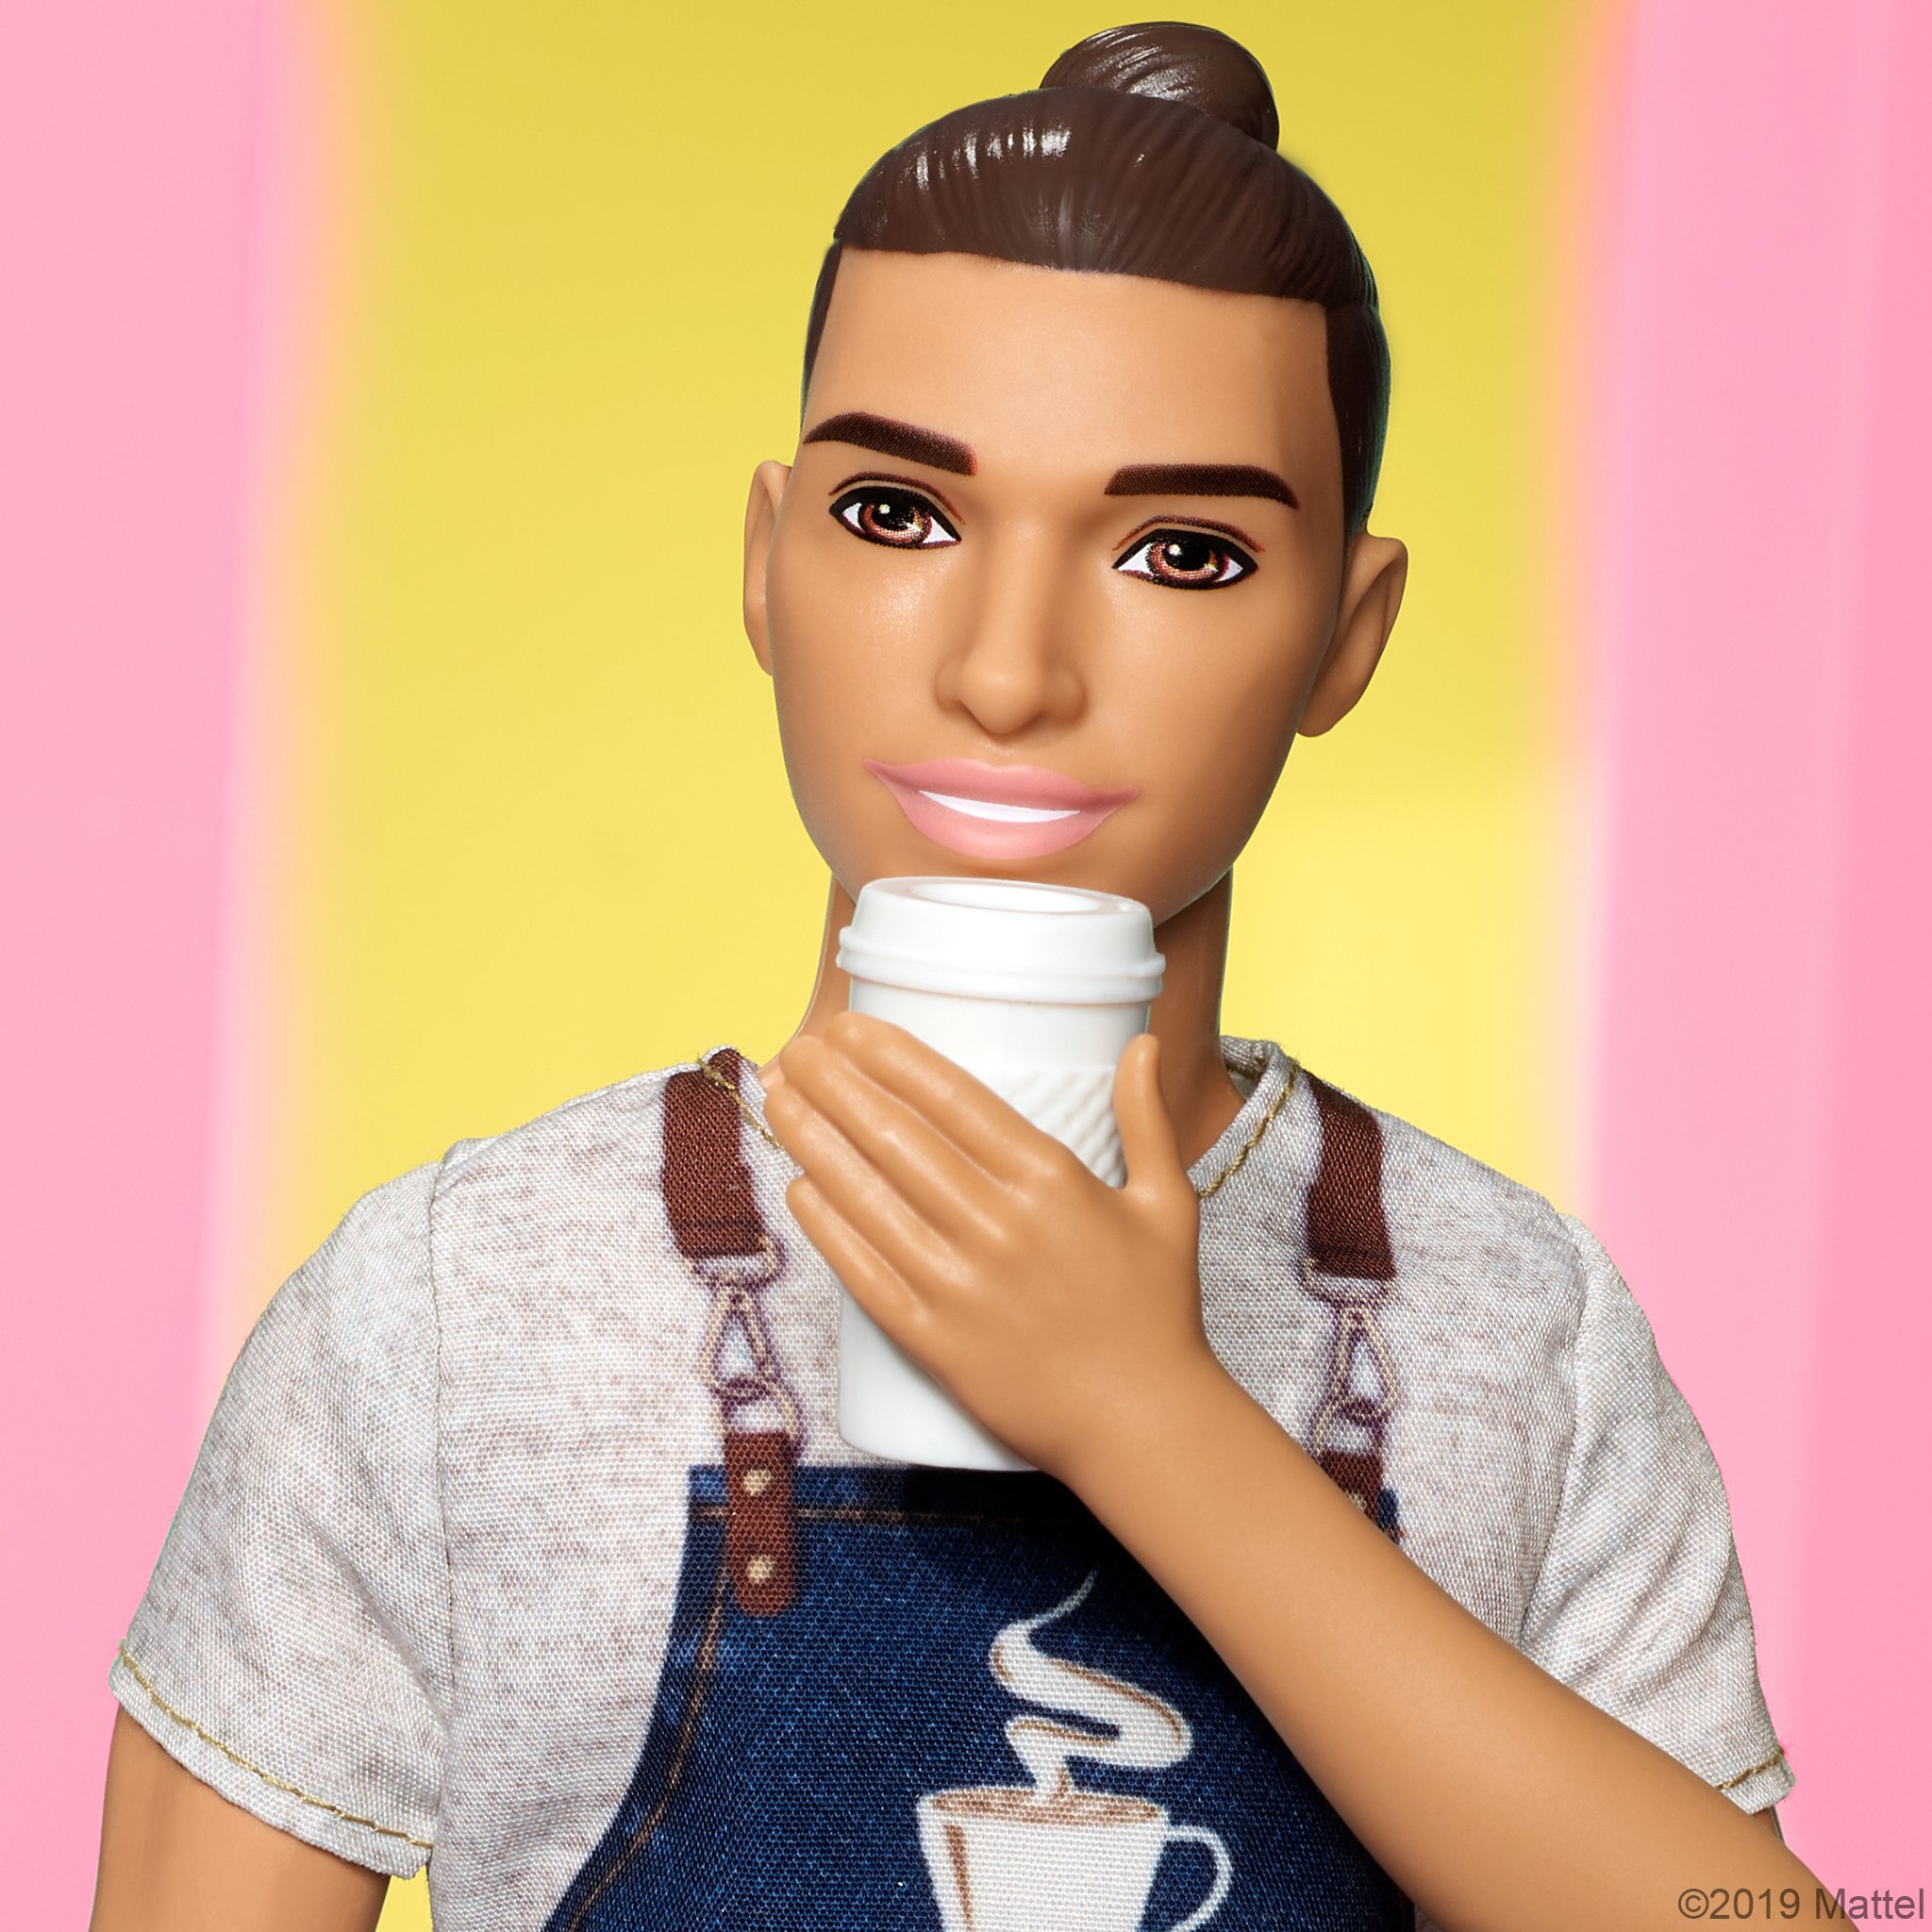 Barbie on Twitter: "But first… ☕ Kickstart your morning with the Ken  Barista Doll! Shop now: https://t.co/ipTg6XsYaL. https://t.co/pTpejkUVjS" /  Twitter